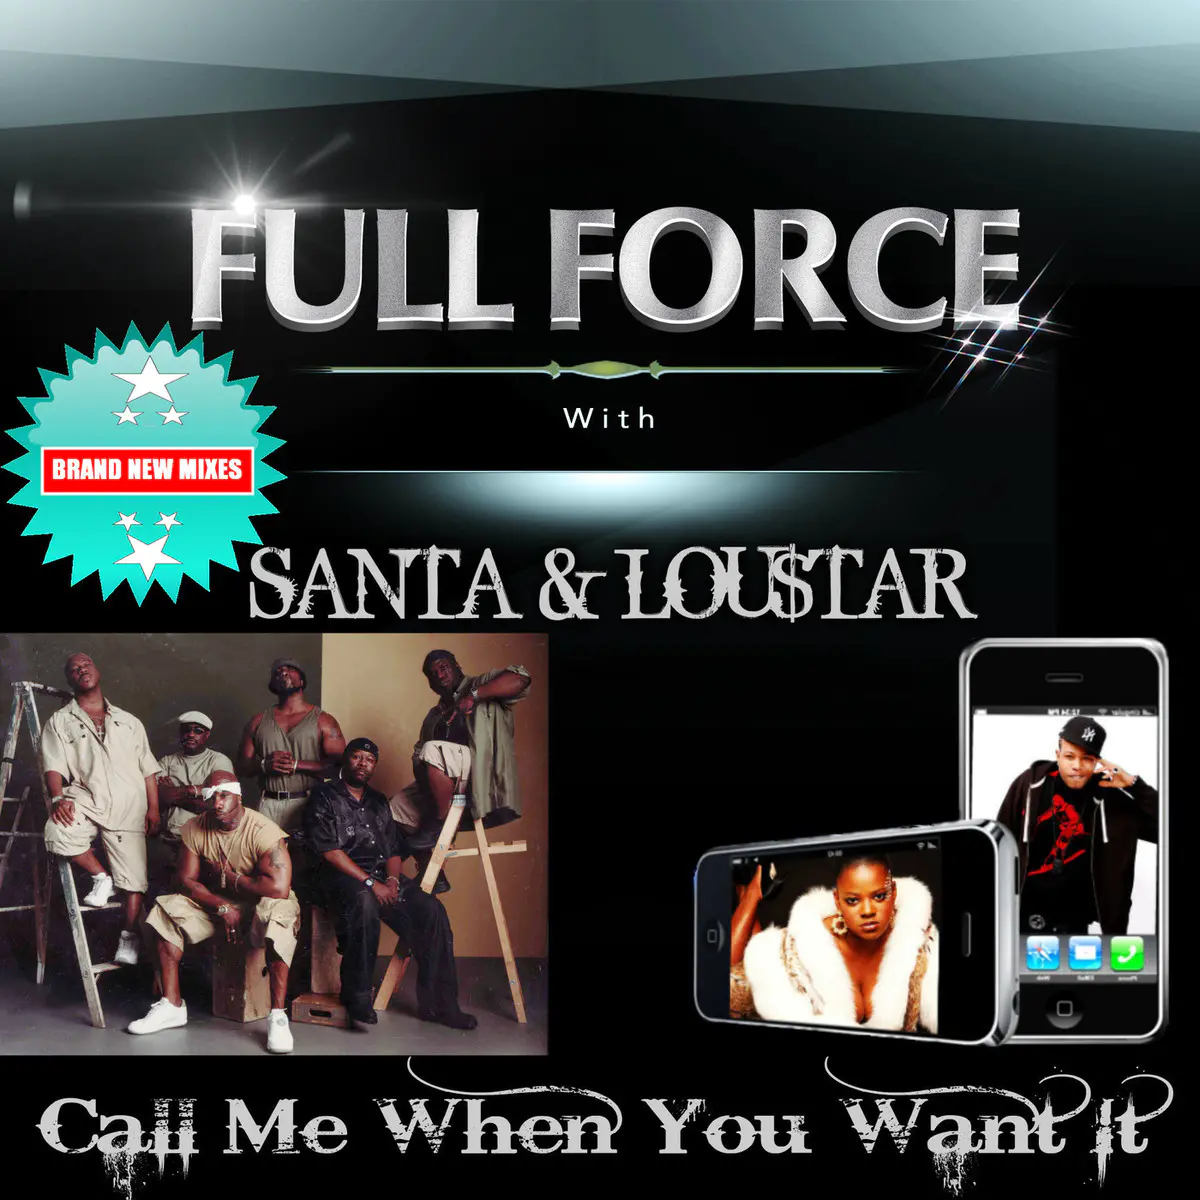 Call Me When You Want It Songs Download Call Me When You Want It Mp3 Songs Online Free On Gaana Com